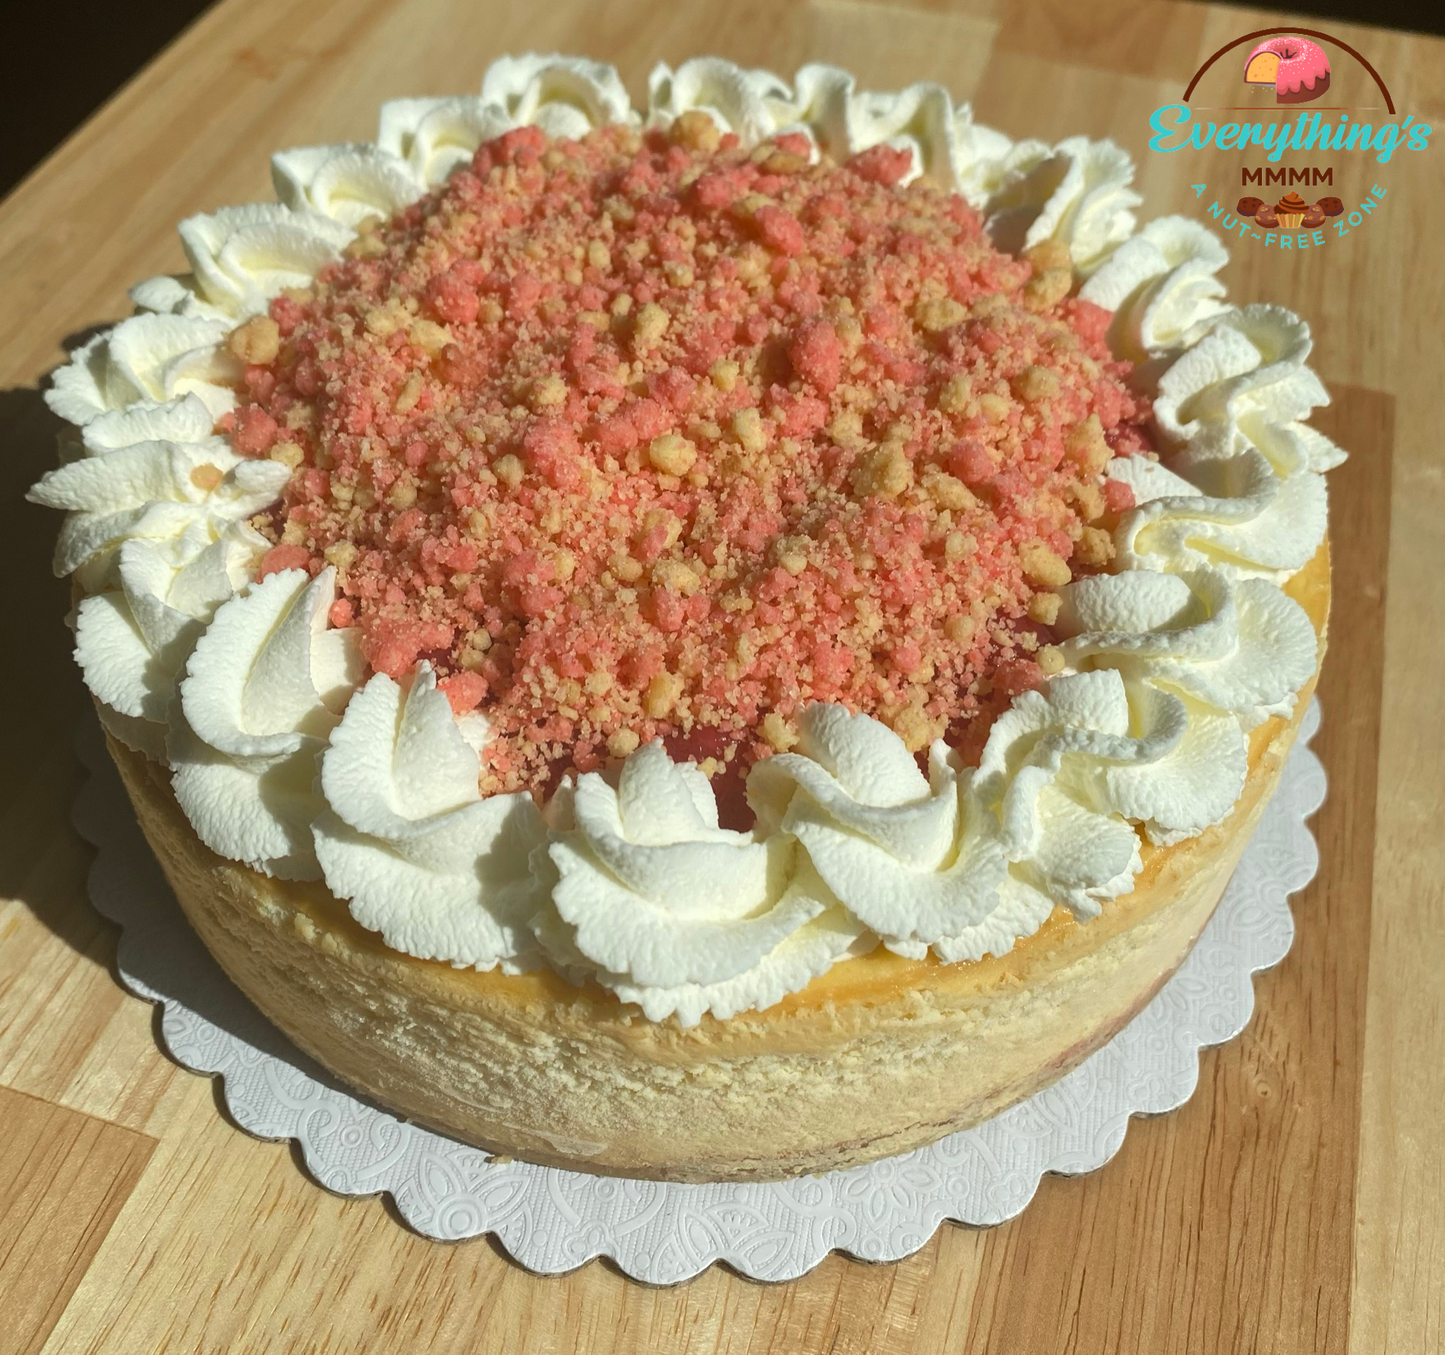 Strawberry Crunch Cheesecake. Strawberry shortcake crumbs. Whipped cream topping. Cookie Crust.